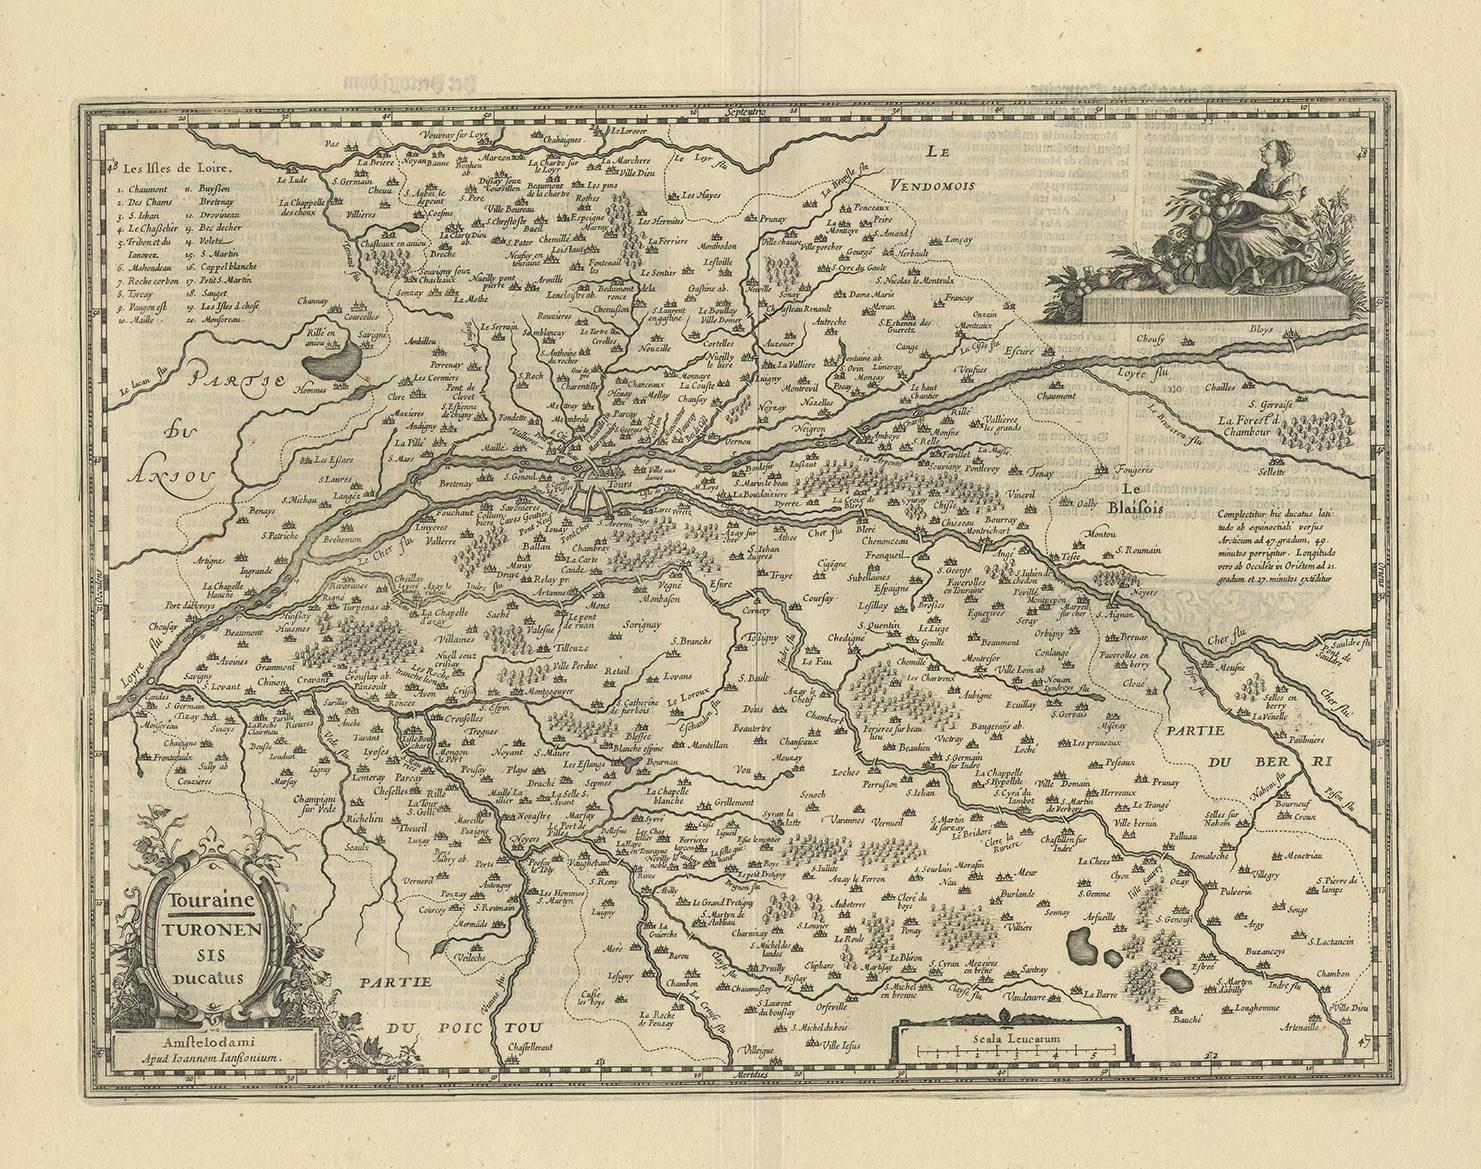 Antique map of France titled 'Touraine - Turonensis Ducatus'. Decorative map of the Touraine region, France. It shows the cities of Tours, Amboise and others. Published by J. Janssonius.